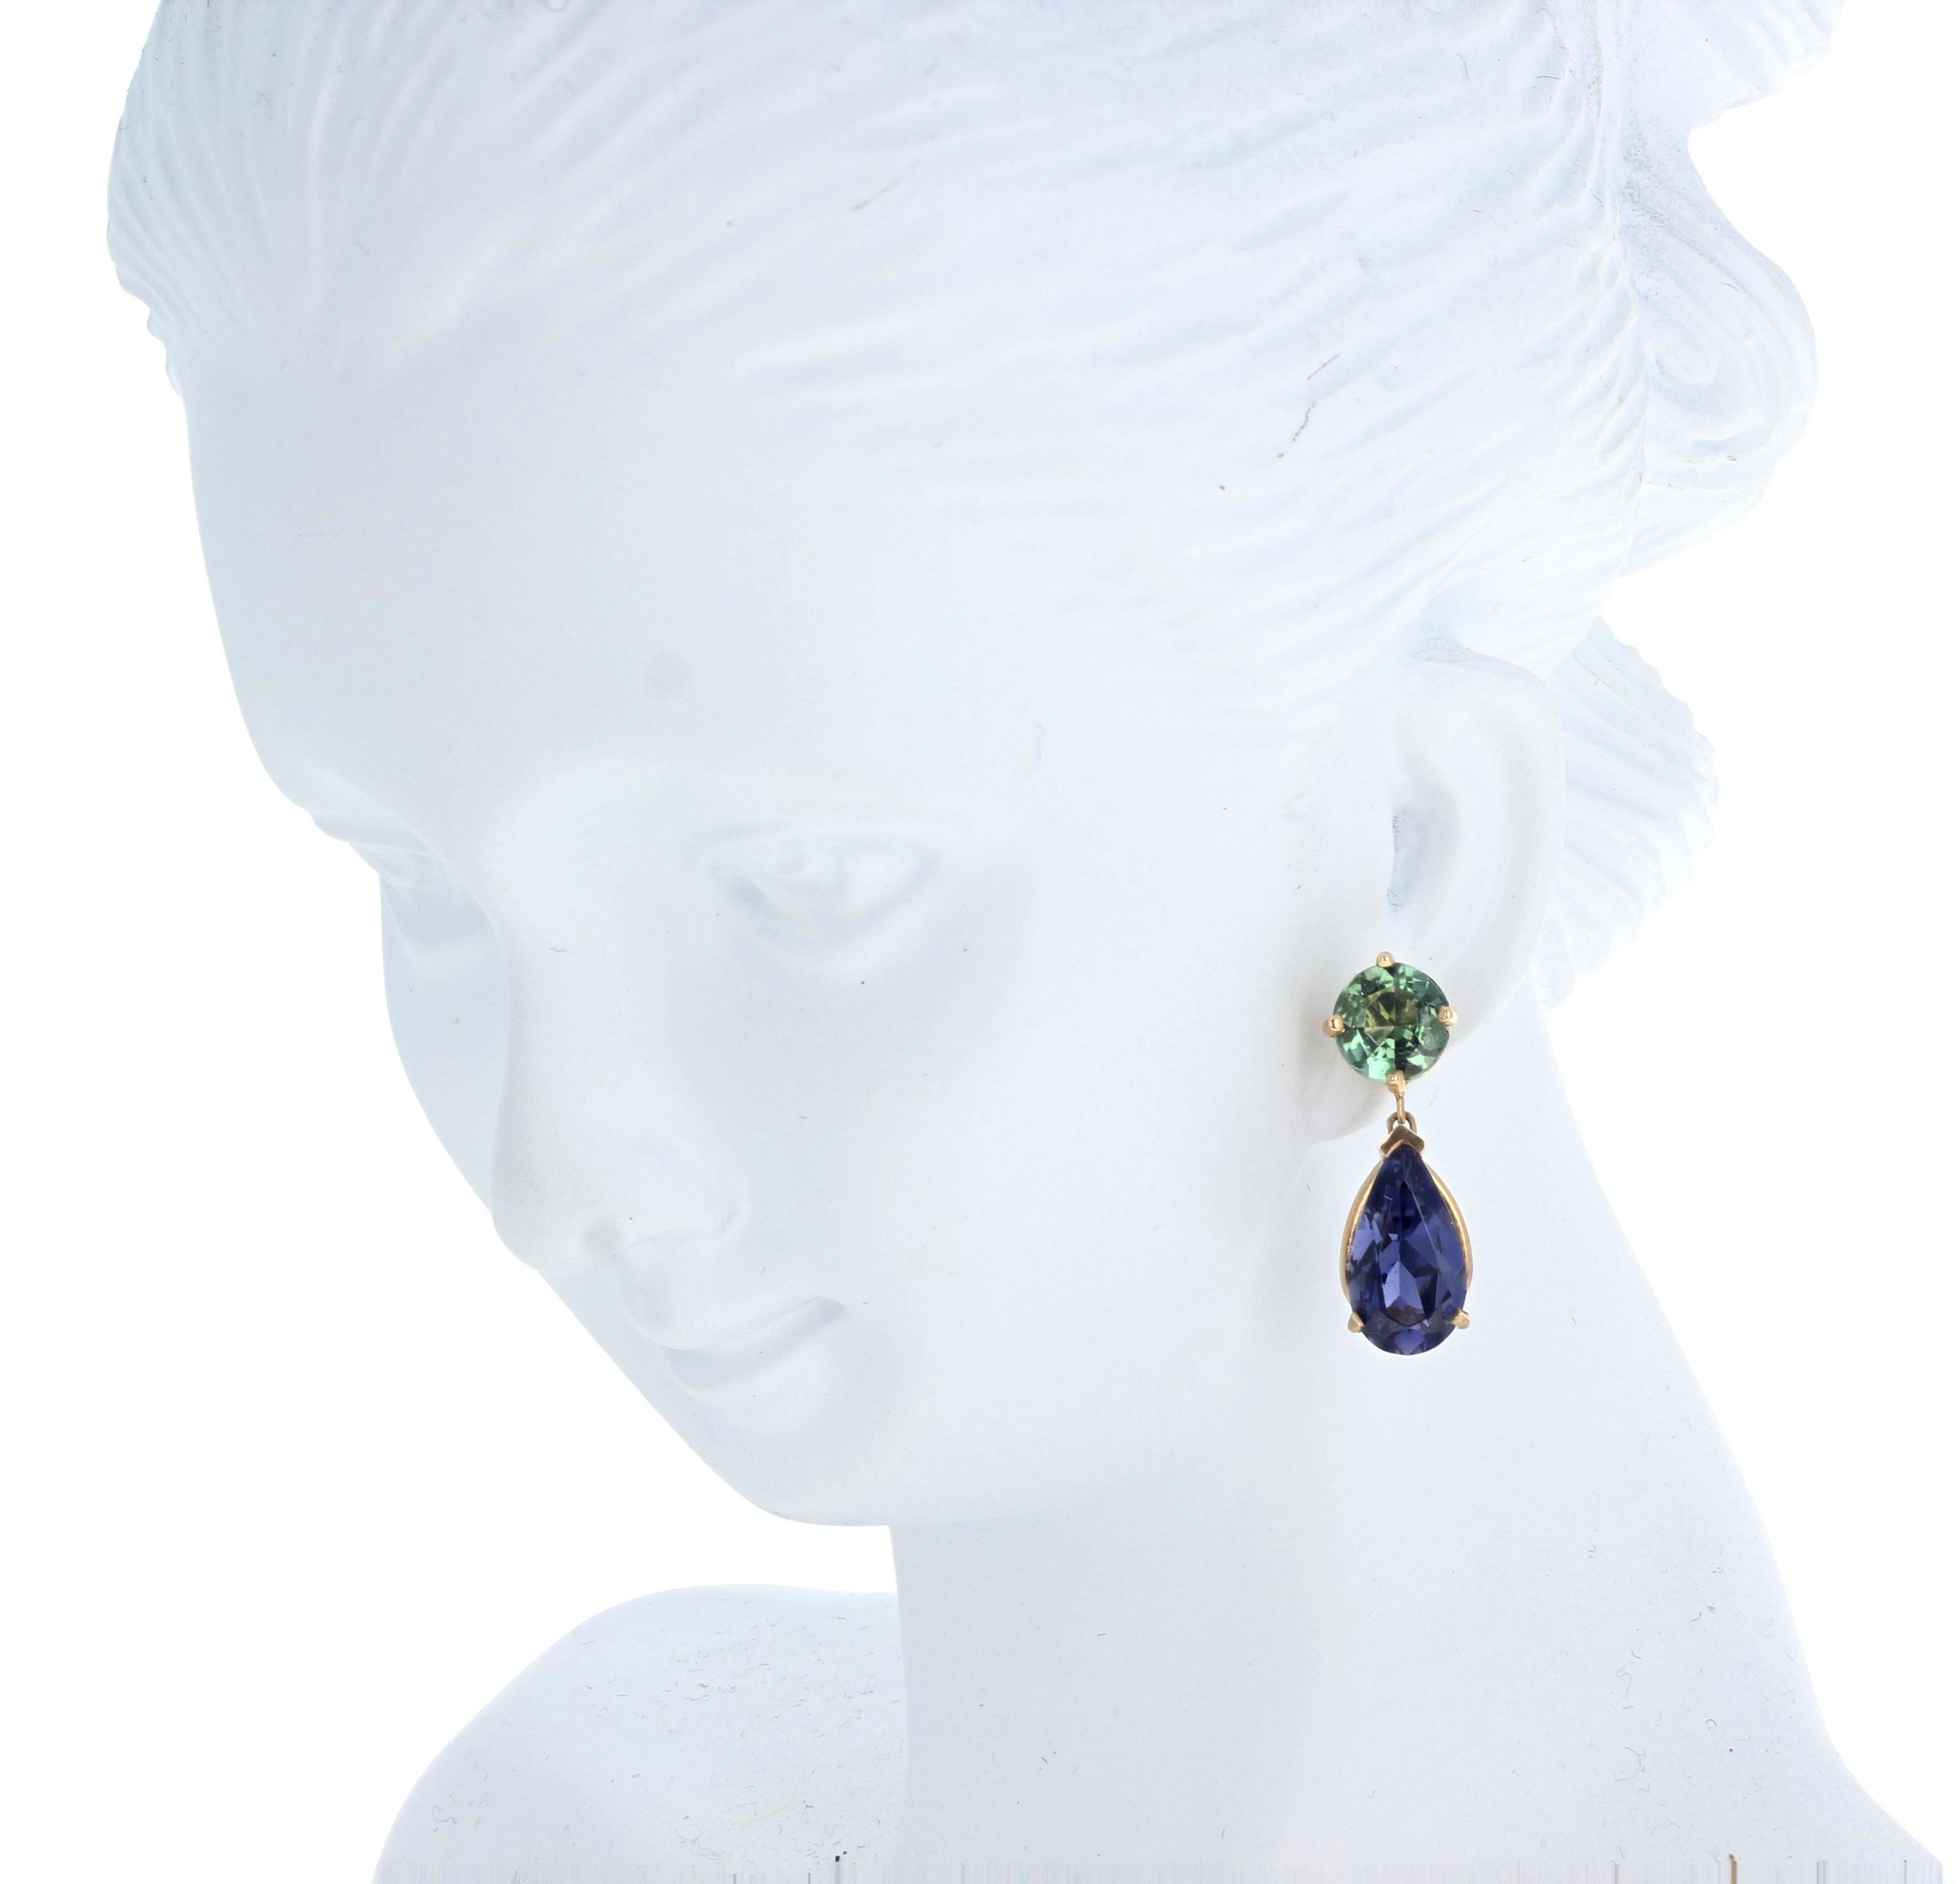 These brilliant round green Tourmalines (6mm) enhance the fascinating intensely blue glittery natural Iolites (10mm x 6 1/2mm) in these 14Kt yellow gold stud earrings.  The total dangle length of these beautiful earrings is 18 1/2mm.  